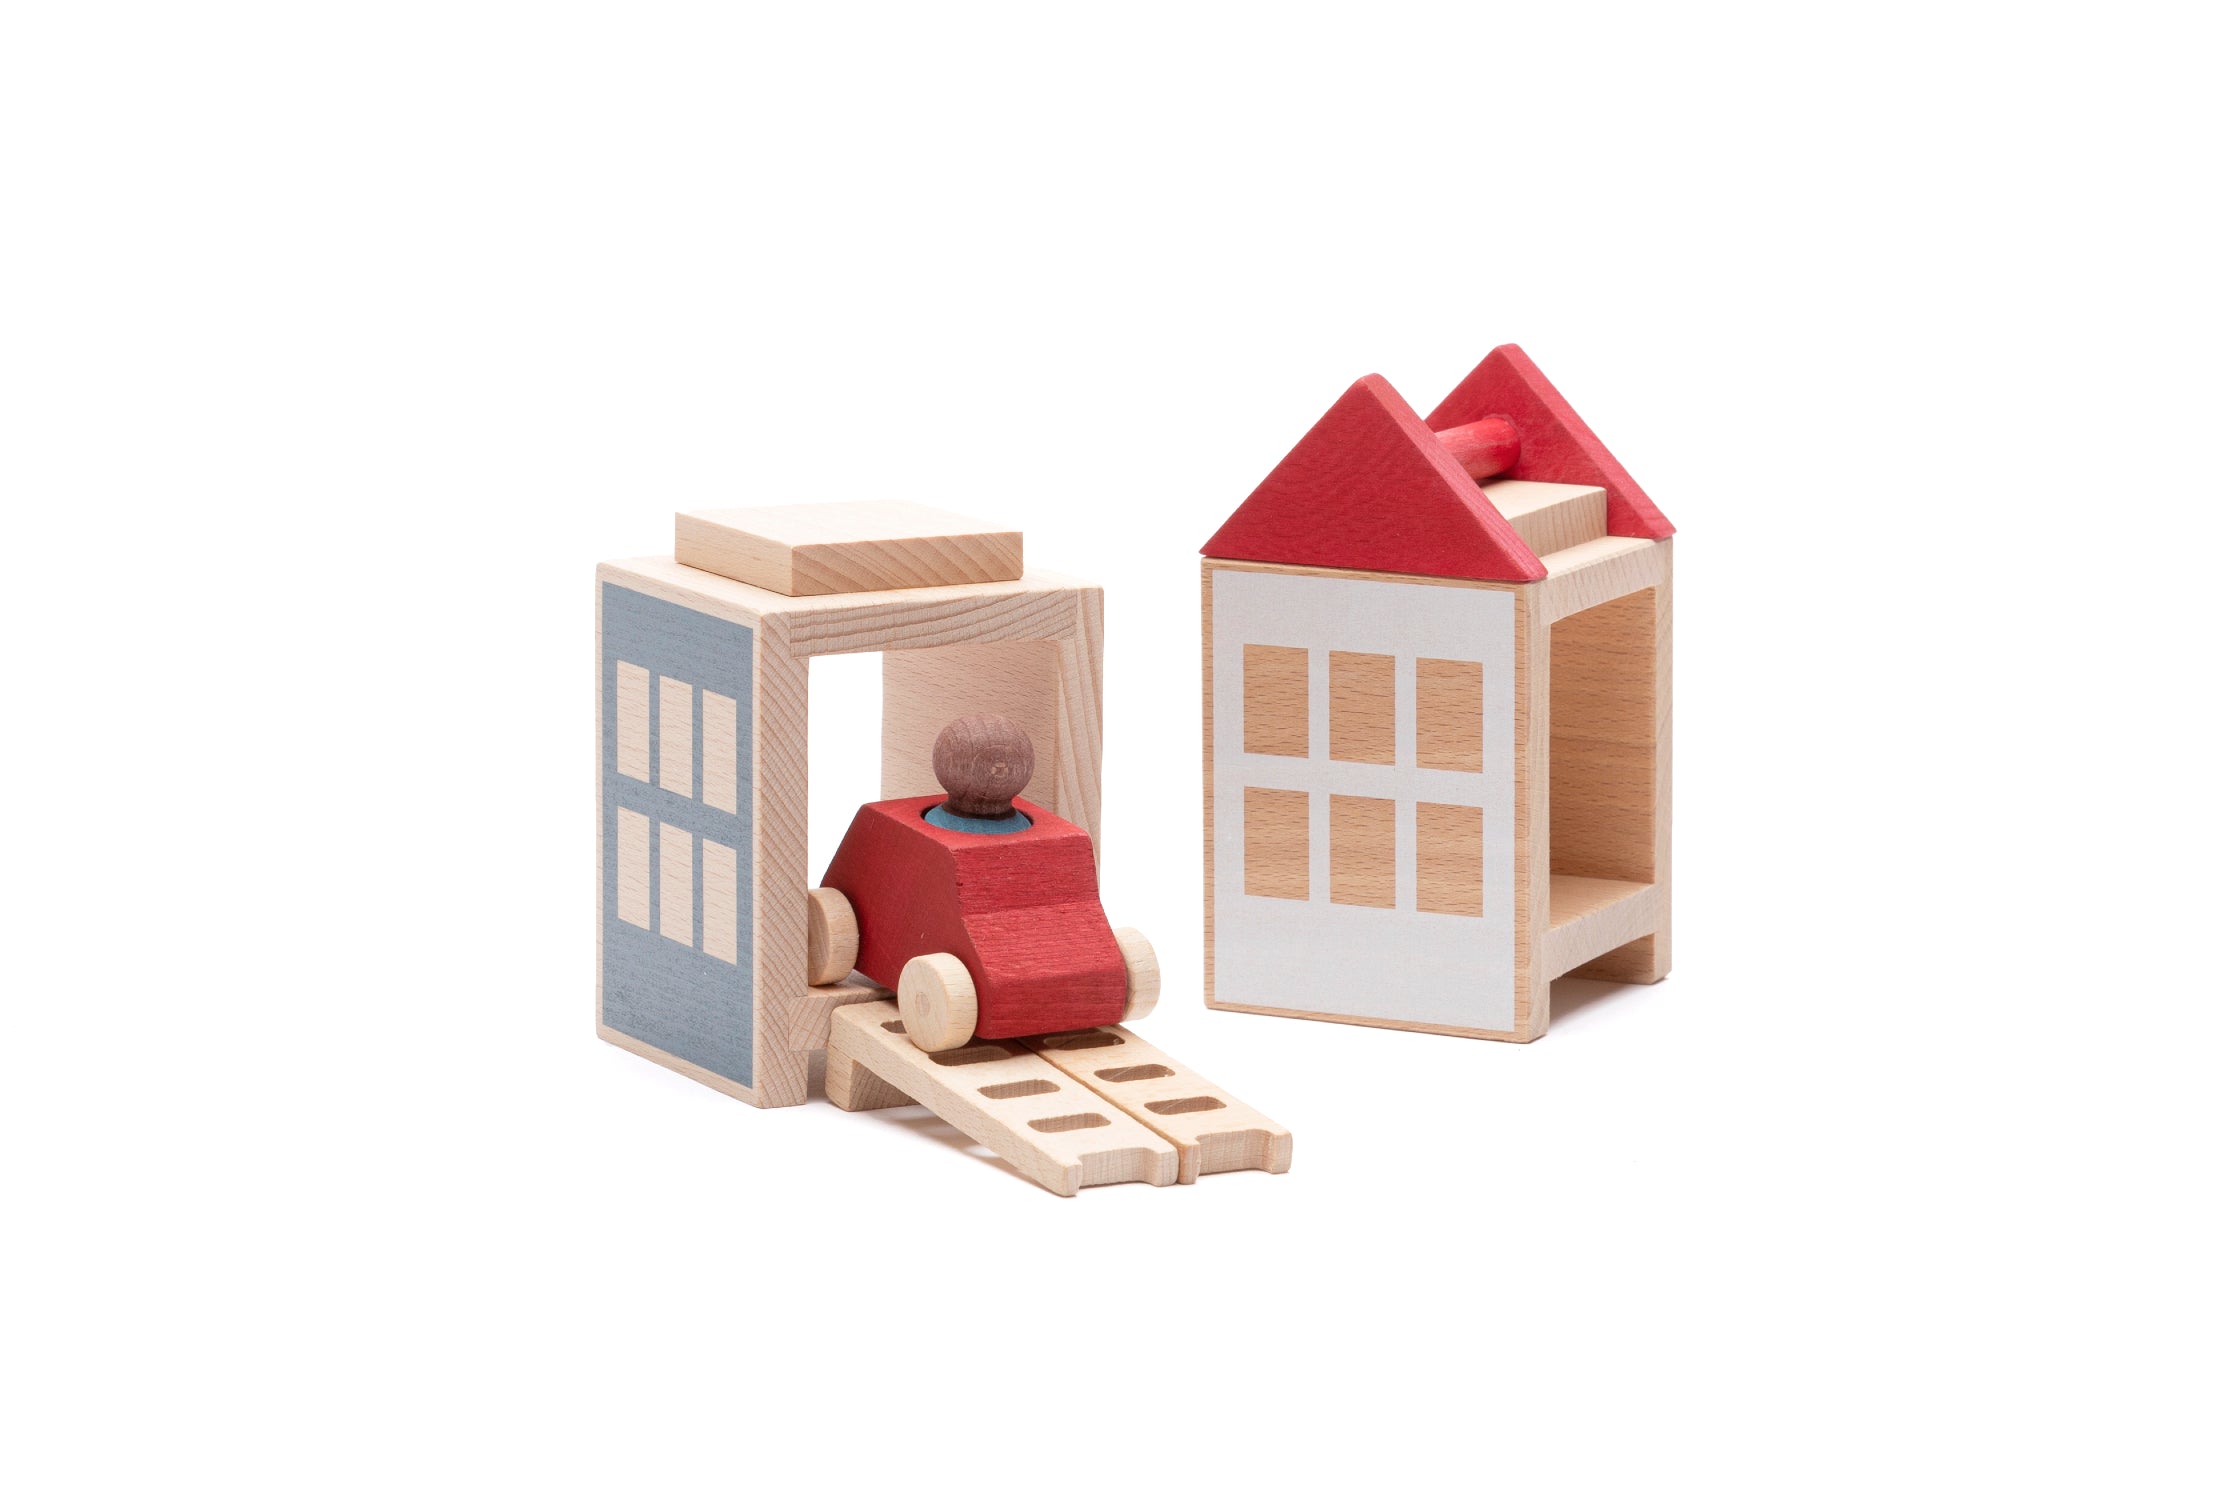 Shop Lubulona Eco-Friendly Wooden Toys at Mymy & Me | Vehicles